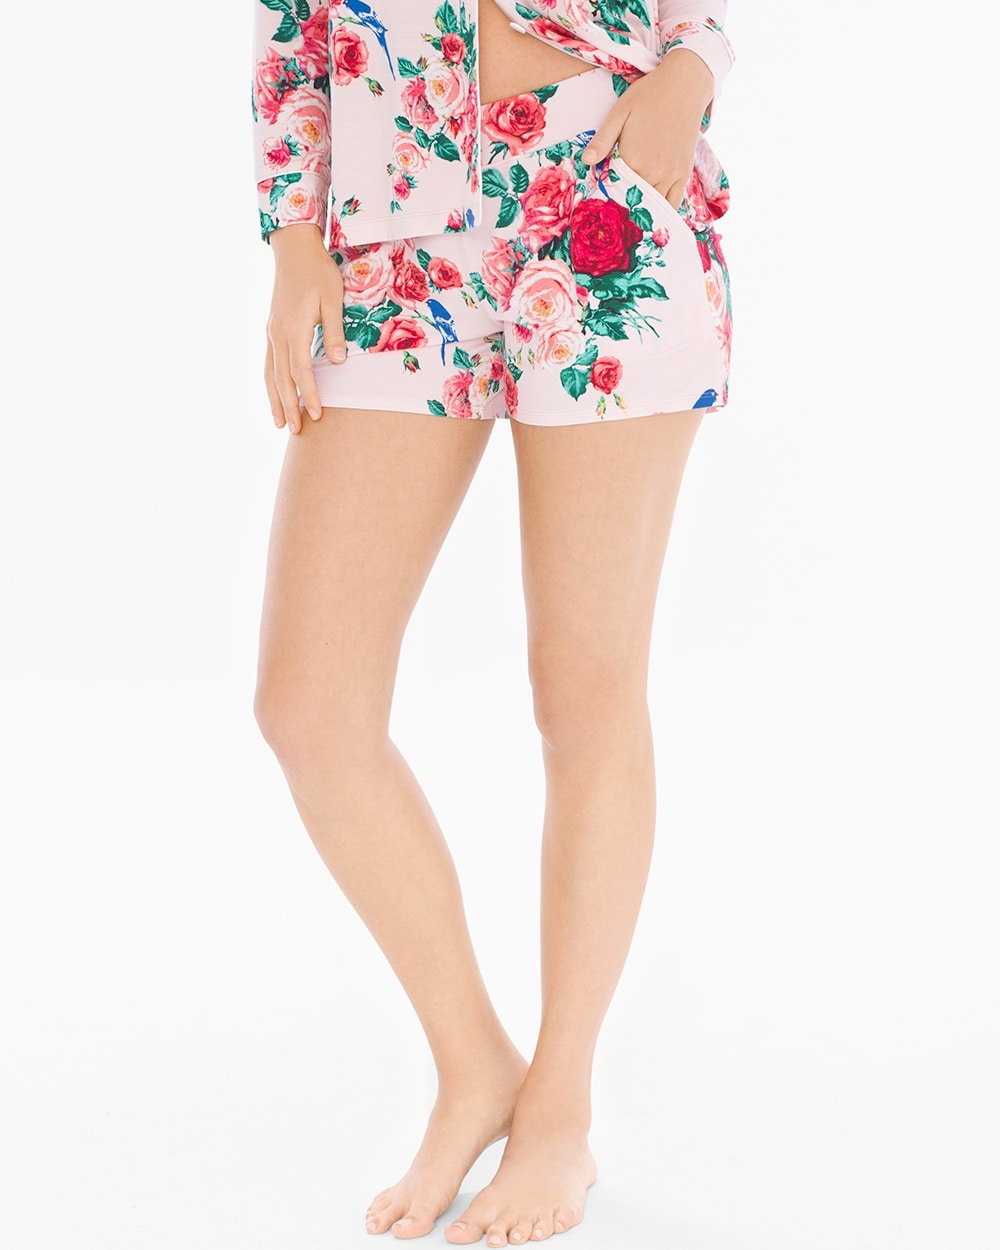 Cool Nights Pajama Shorts Floral Fancy Pink